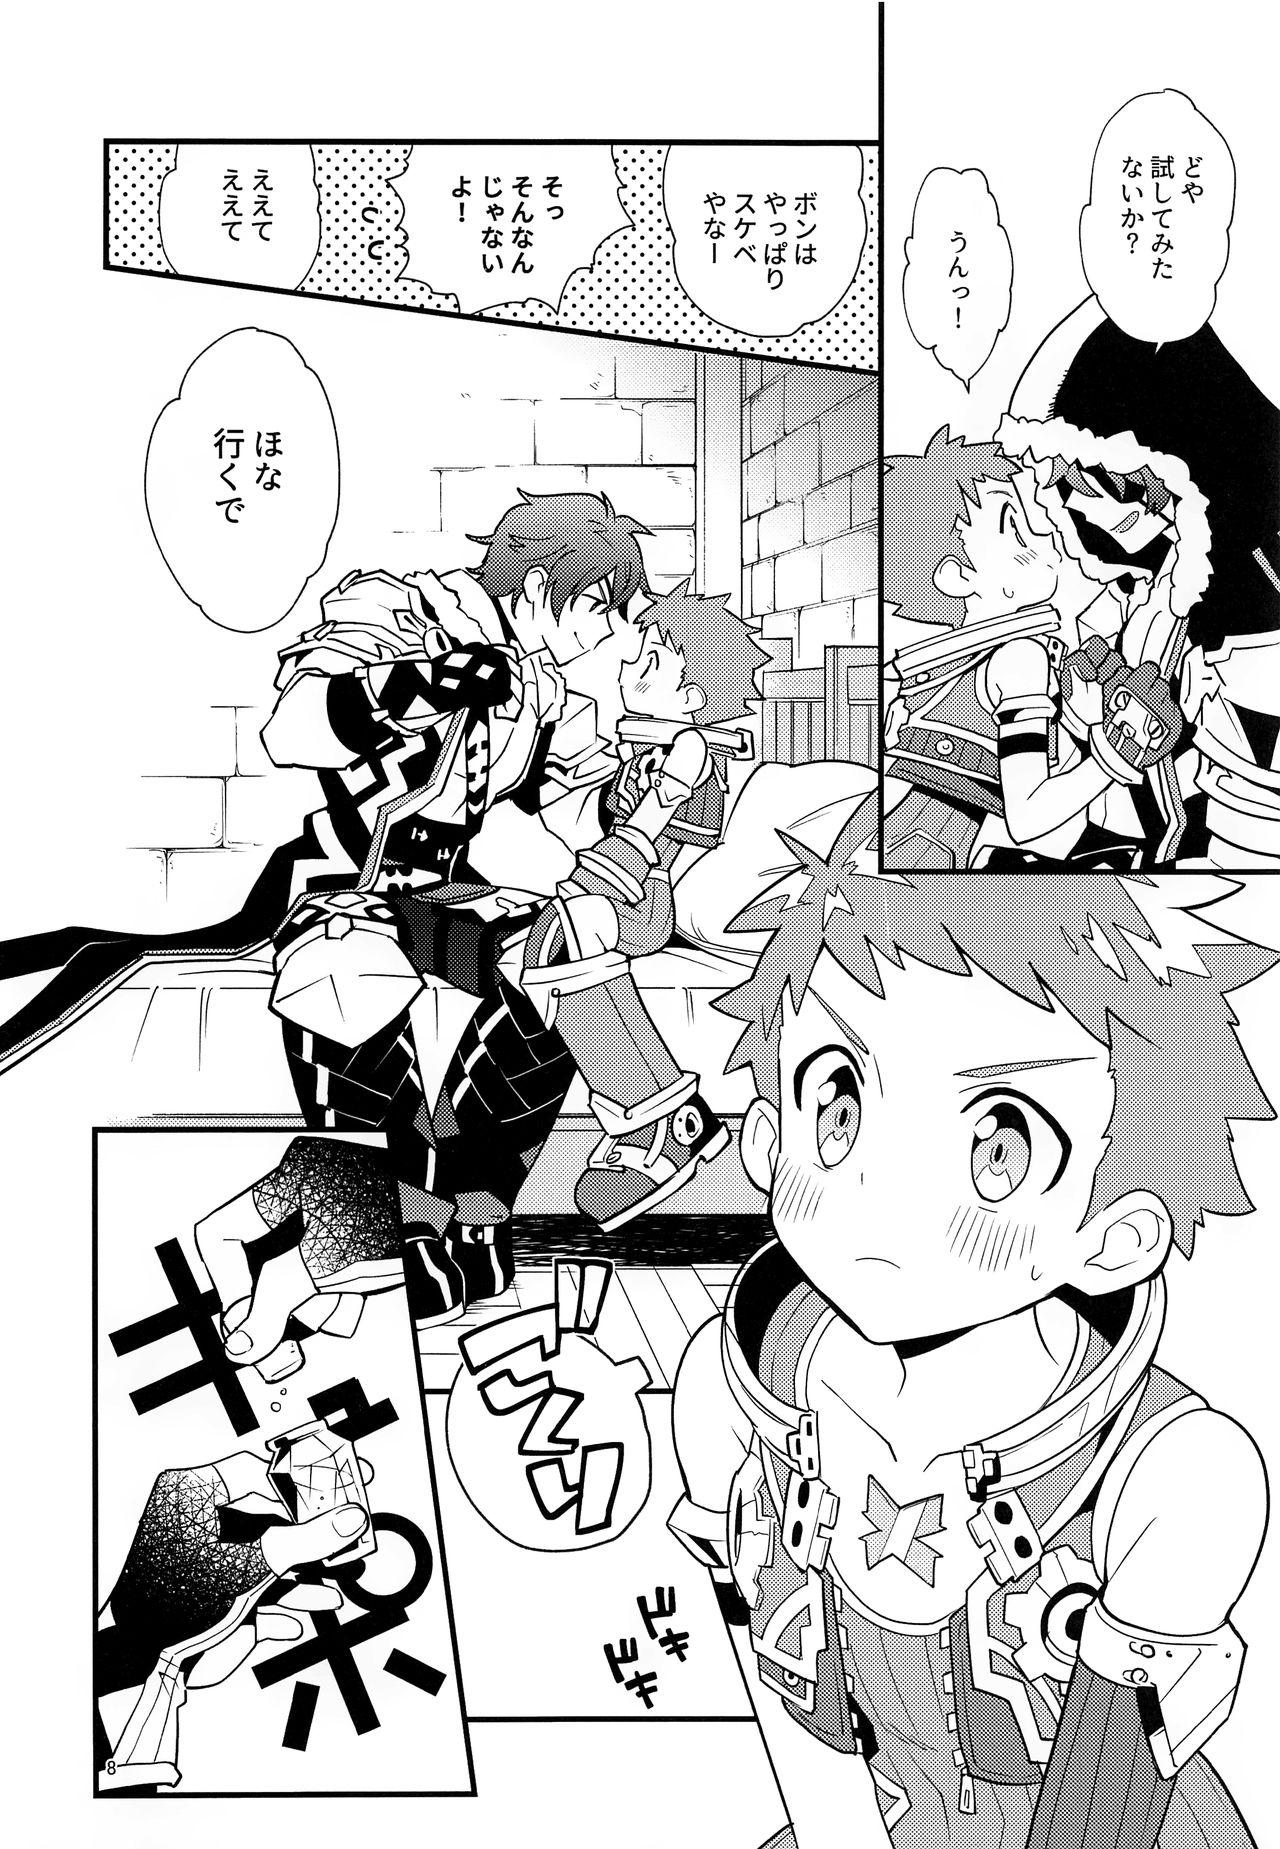 Couples TROP DUEX - Xenoblade chronicles 2 POV - Page 7